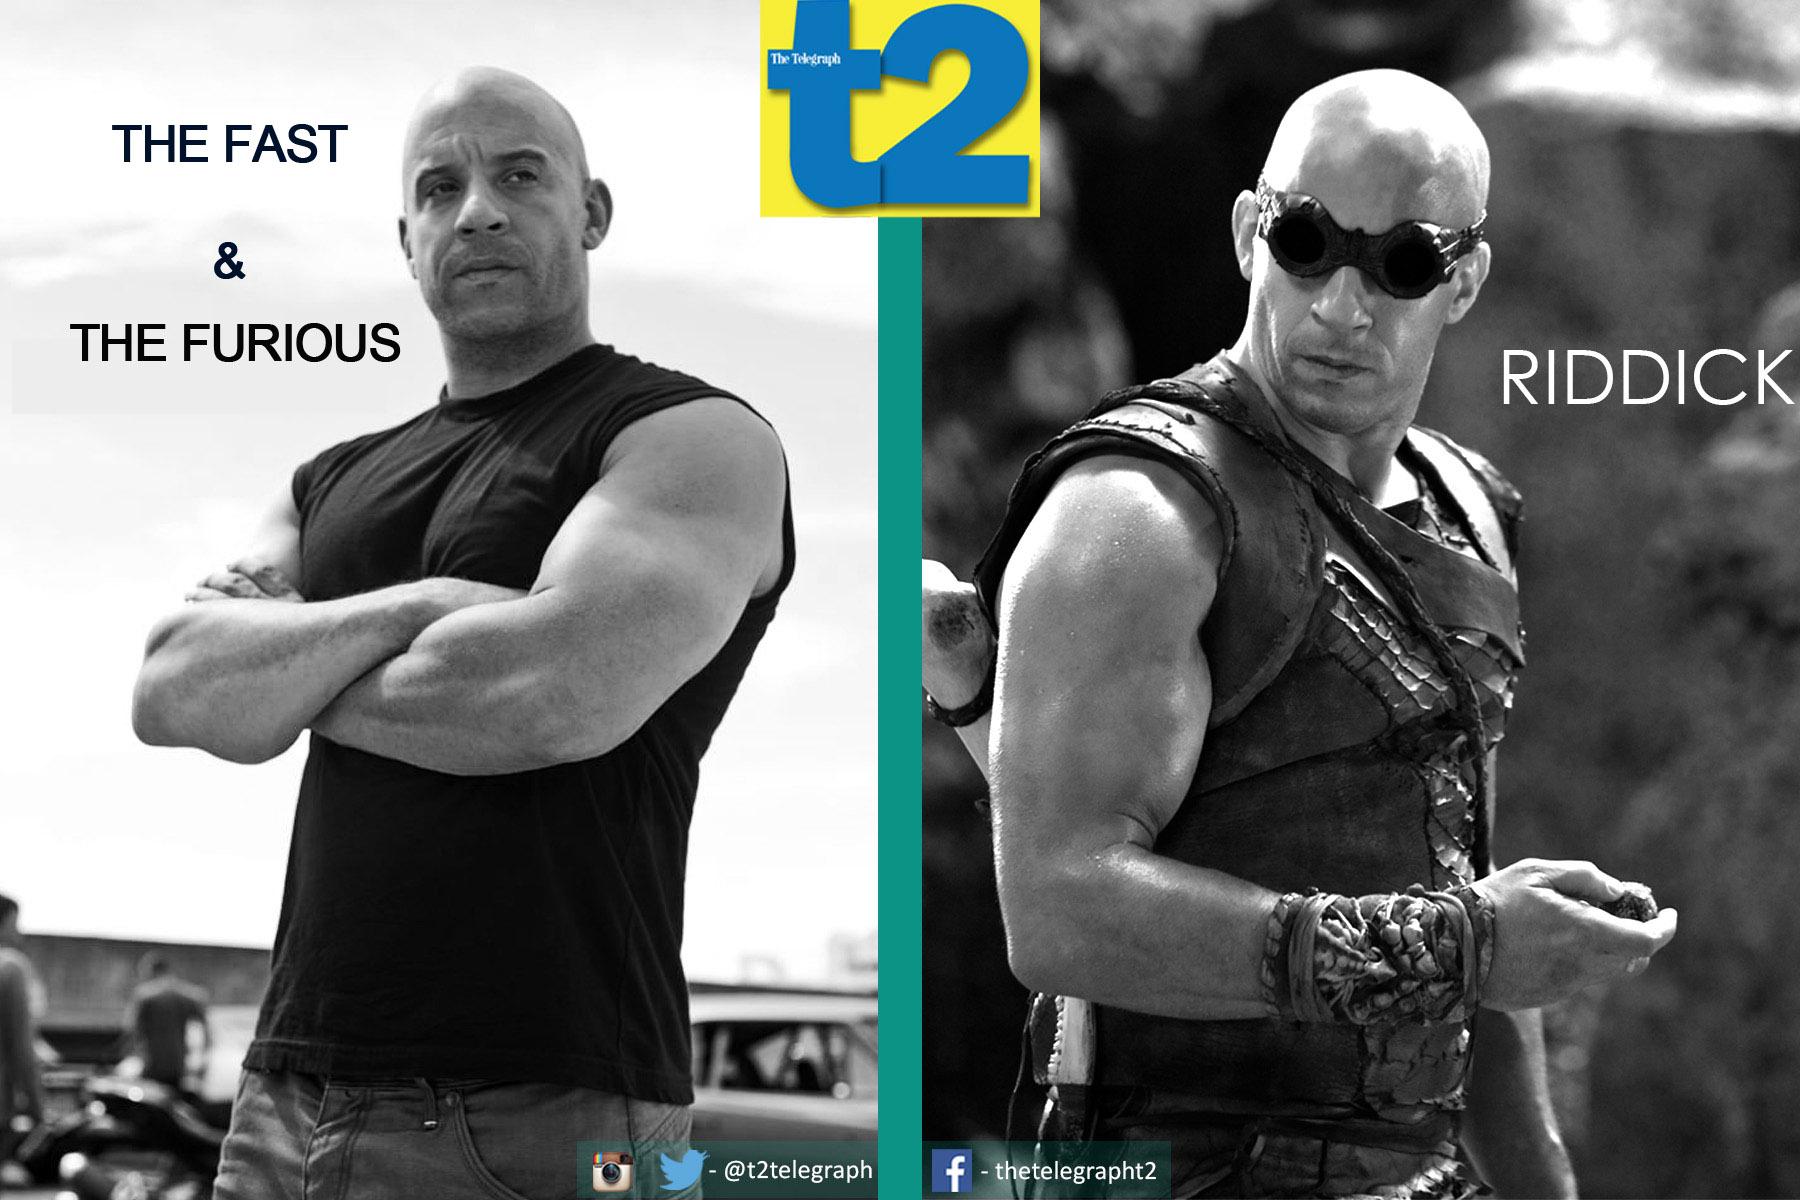 Happy birthday Dominic Toretto or Riddick which Vin Diesel role is your favourite? 